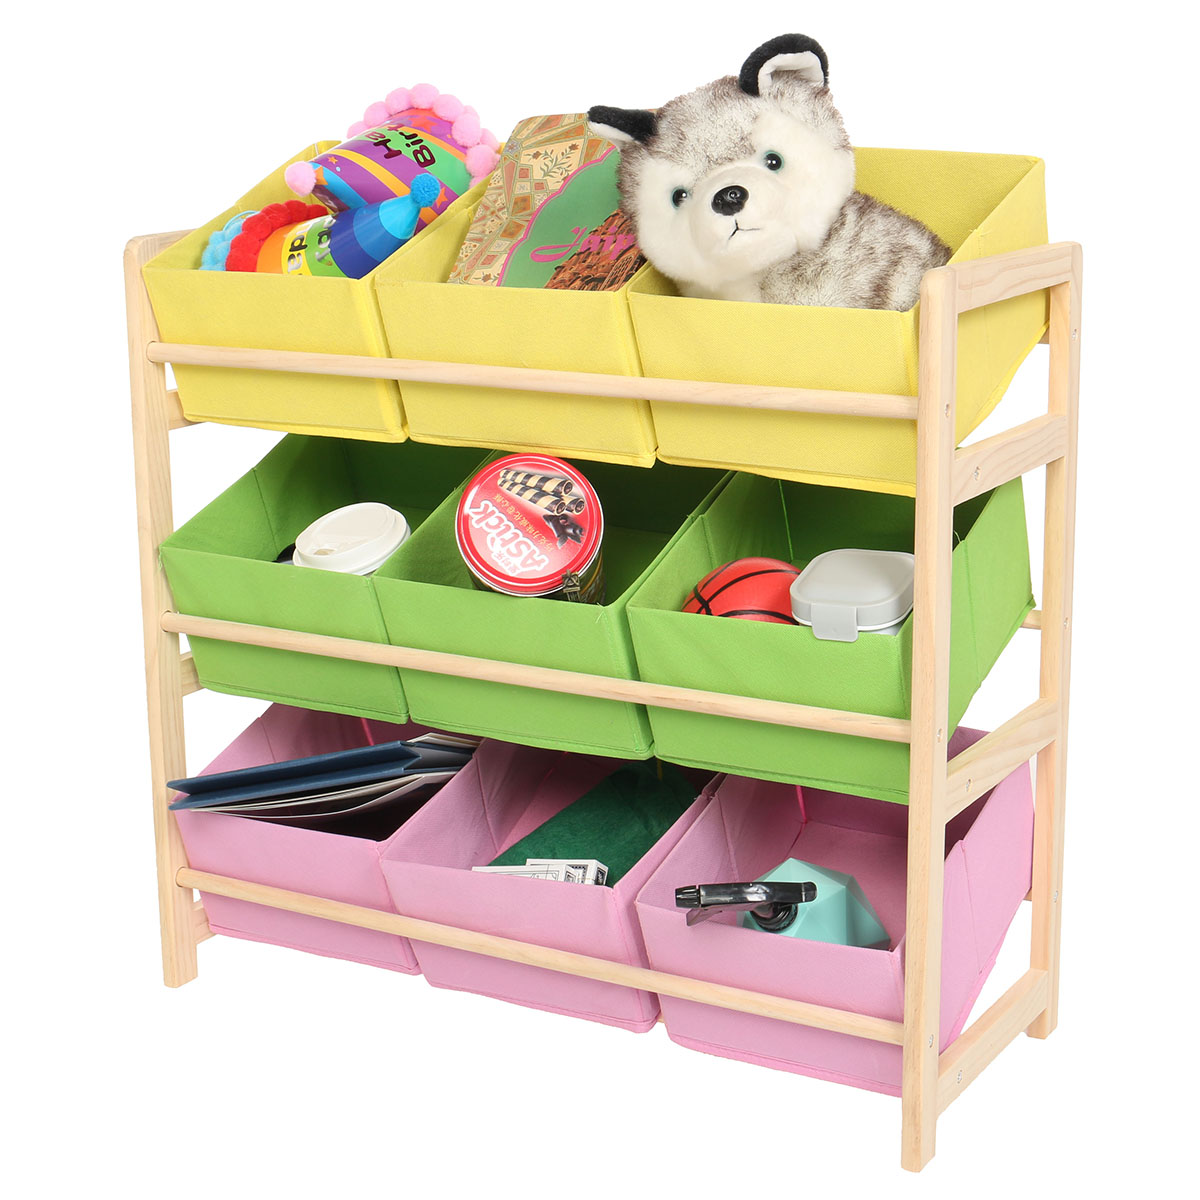 66309CM-Yellow-Pink-Green-Solid-Wood-Childrens-Toy-Rack-Storage-Rack-Toy-Rack-1754652-5